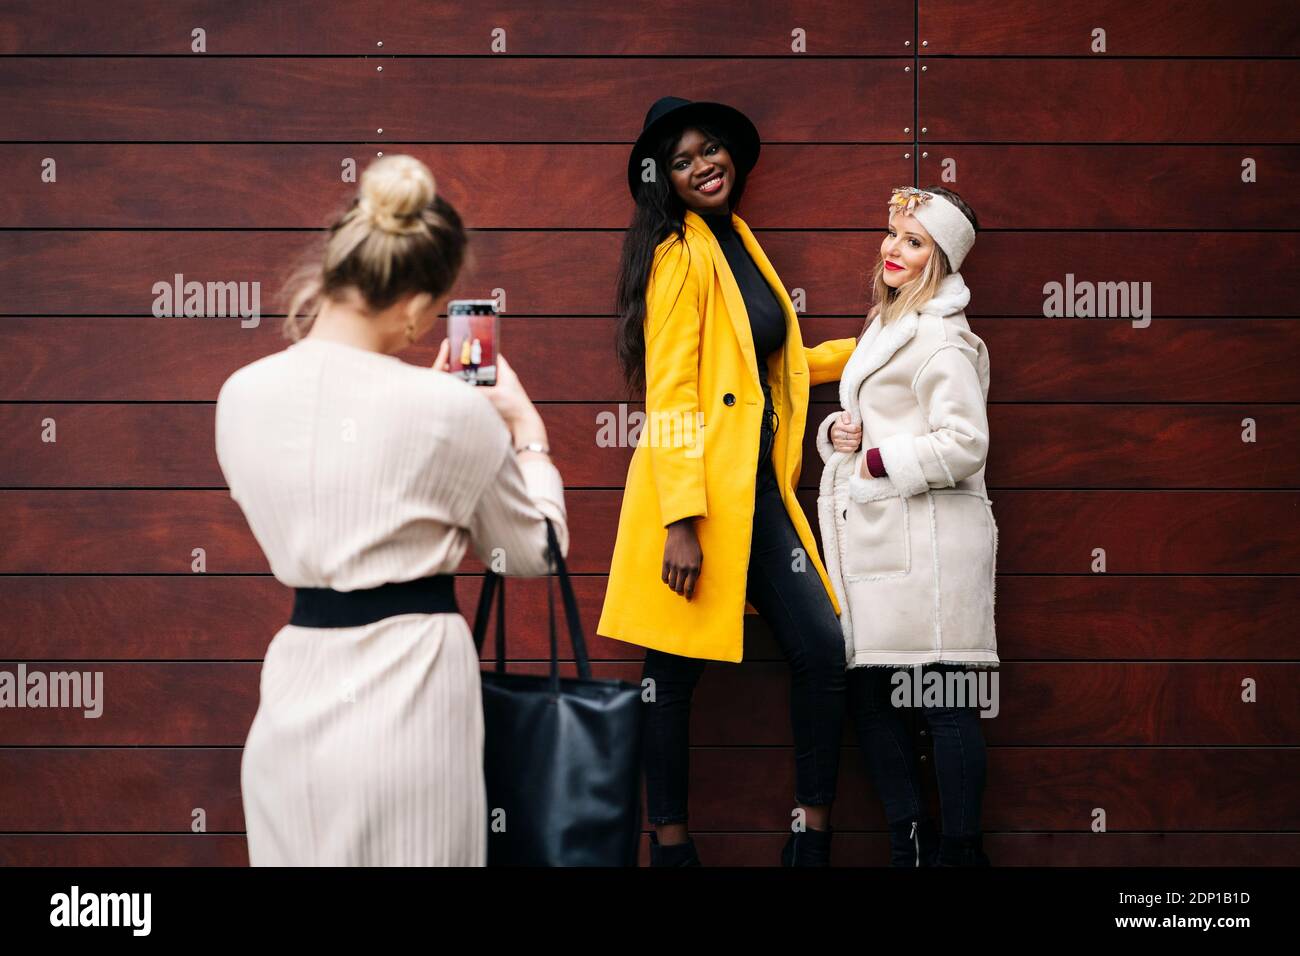 Two fashionable women posing for a photo at a wooden wall Stock Photo